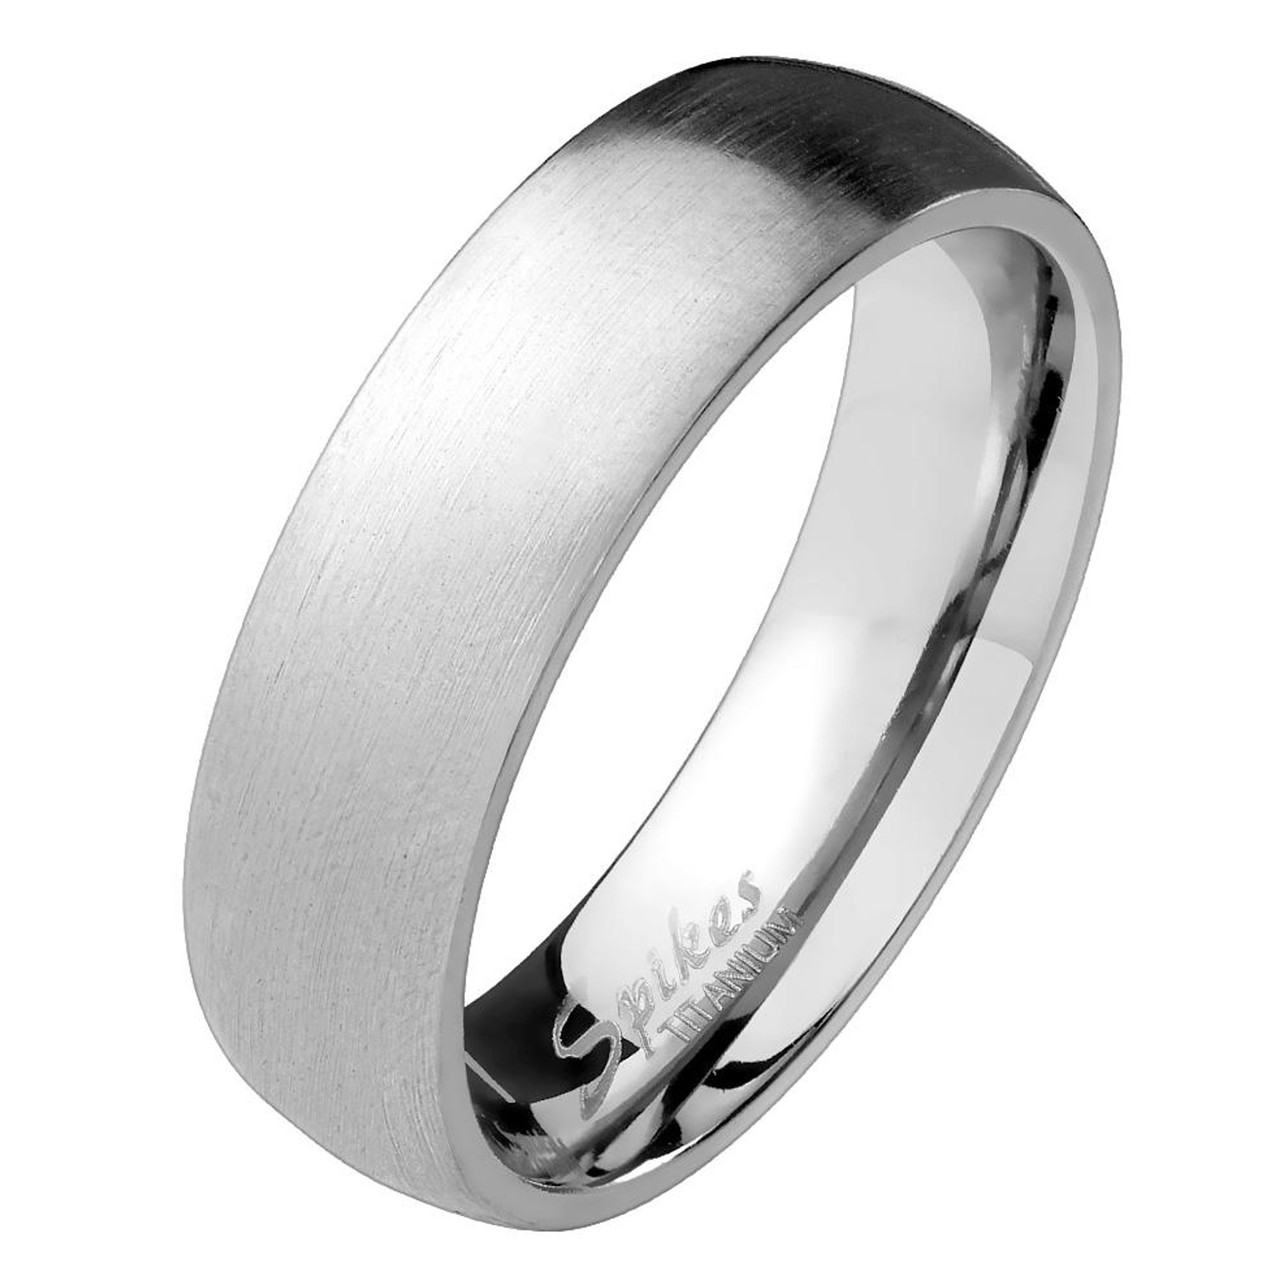 Personalized Mens 6mm Comfort Fit Domed Sterling Silver Wedding Band